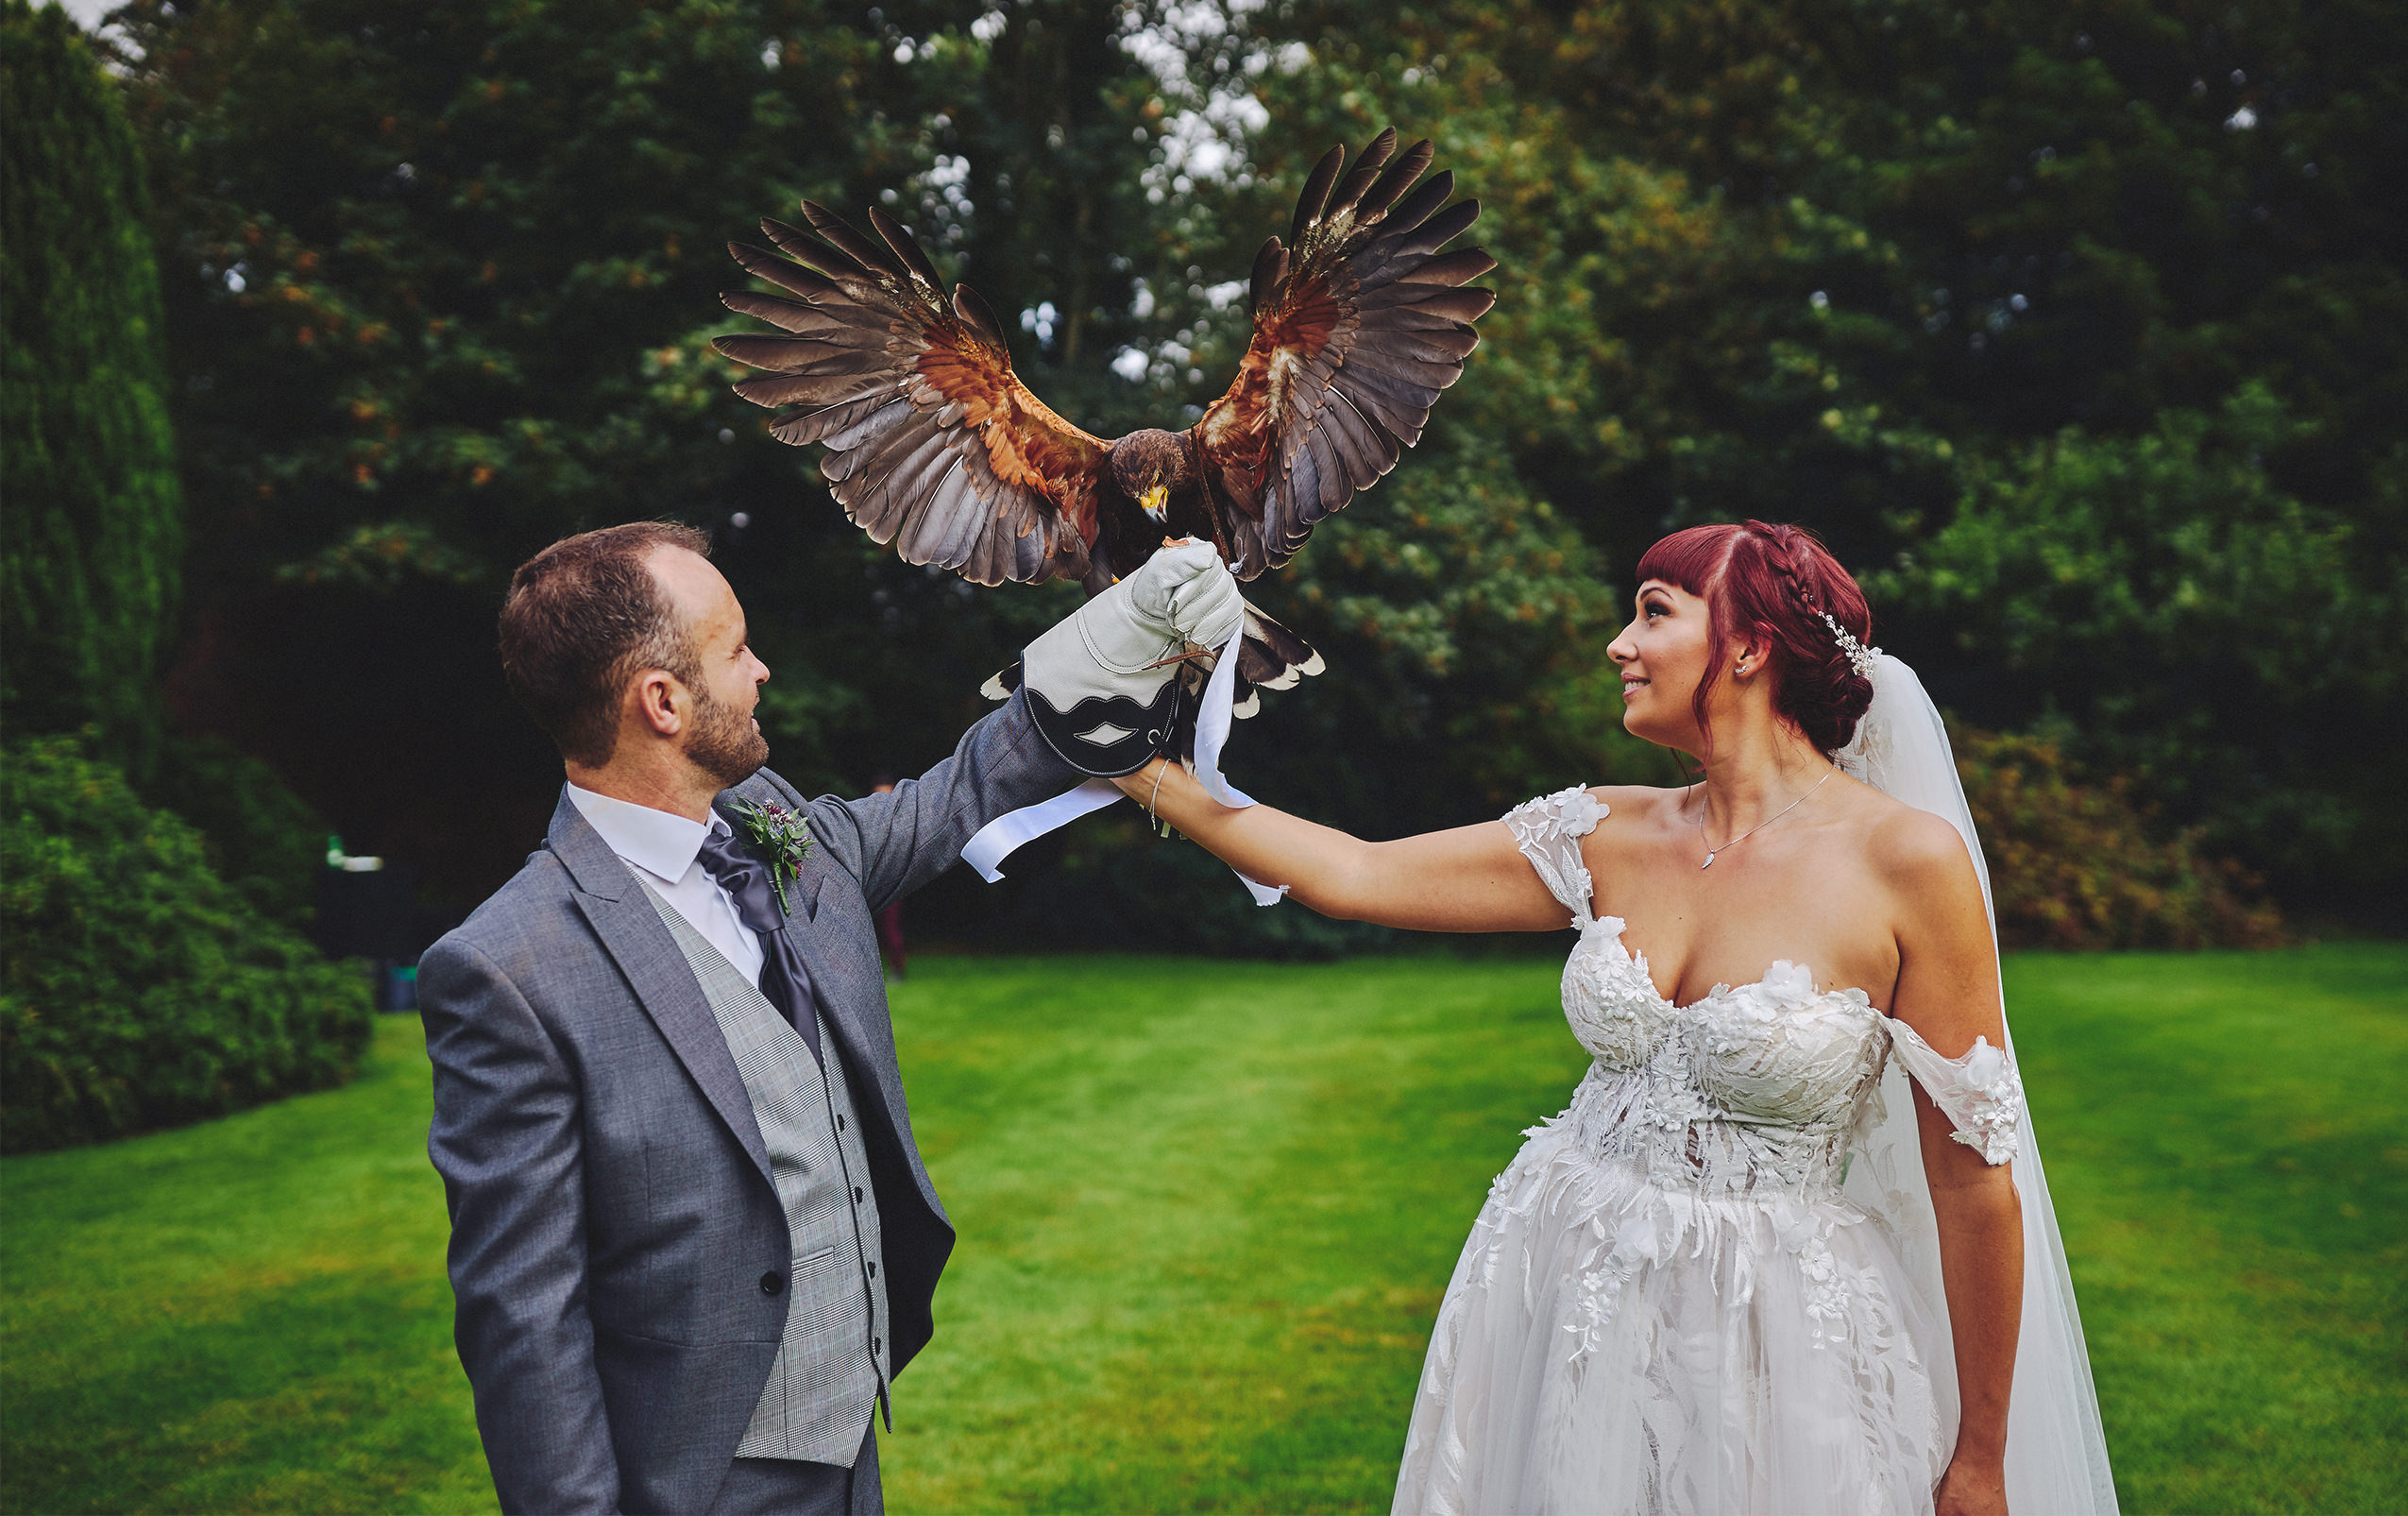 Waterford Castle Outdoor Wedding Ceremony